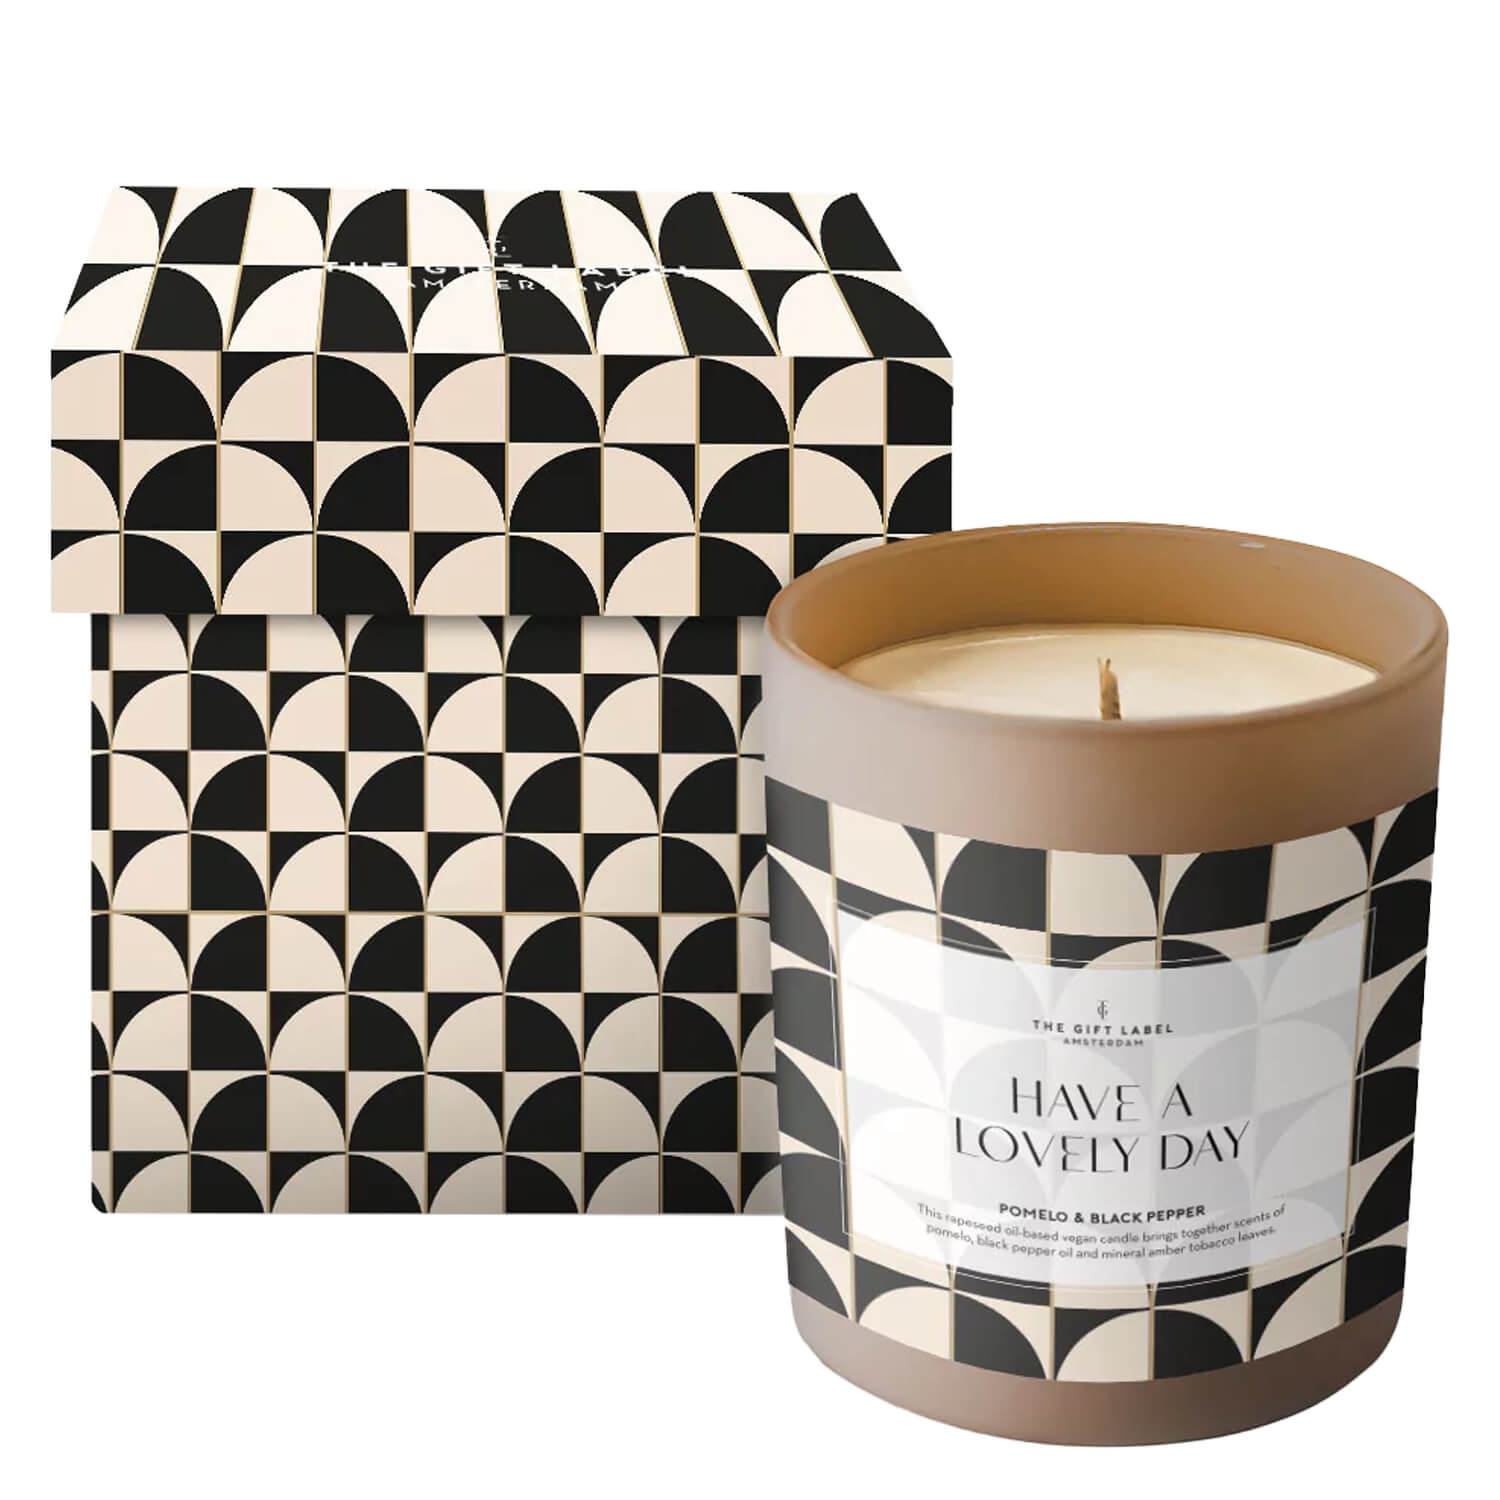 Produktbild von TGL Home - Candle Glass Pomelo & Black Pepper  Have A Lovely Day